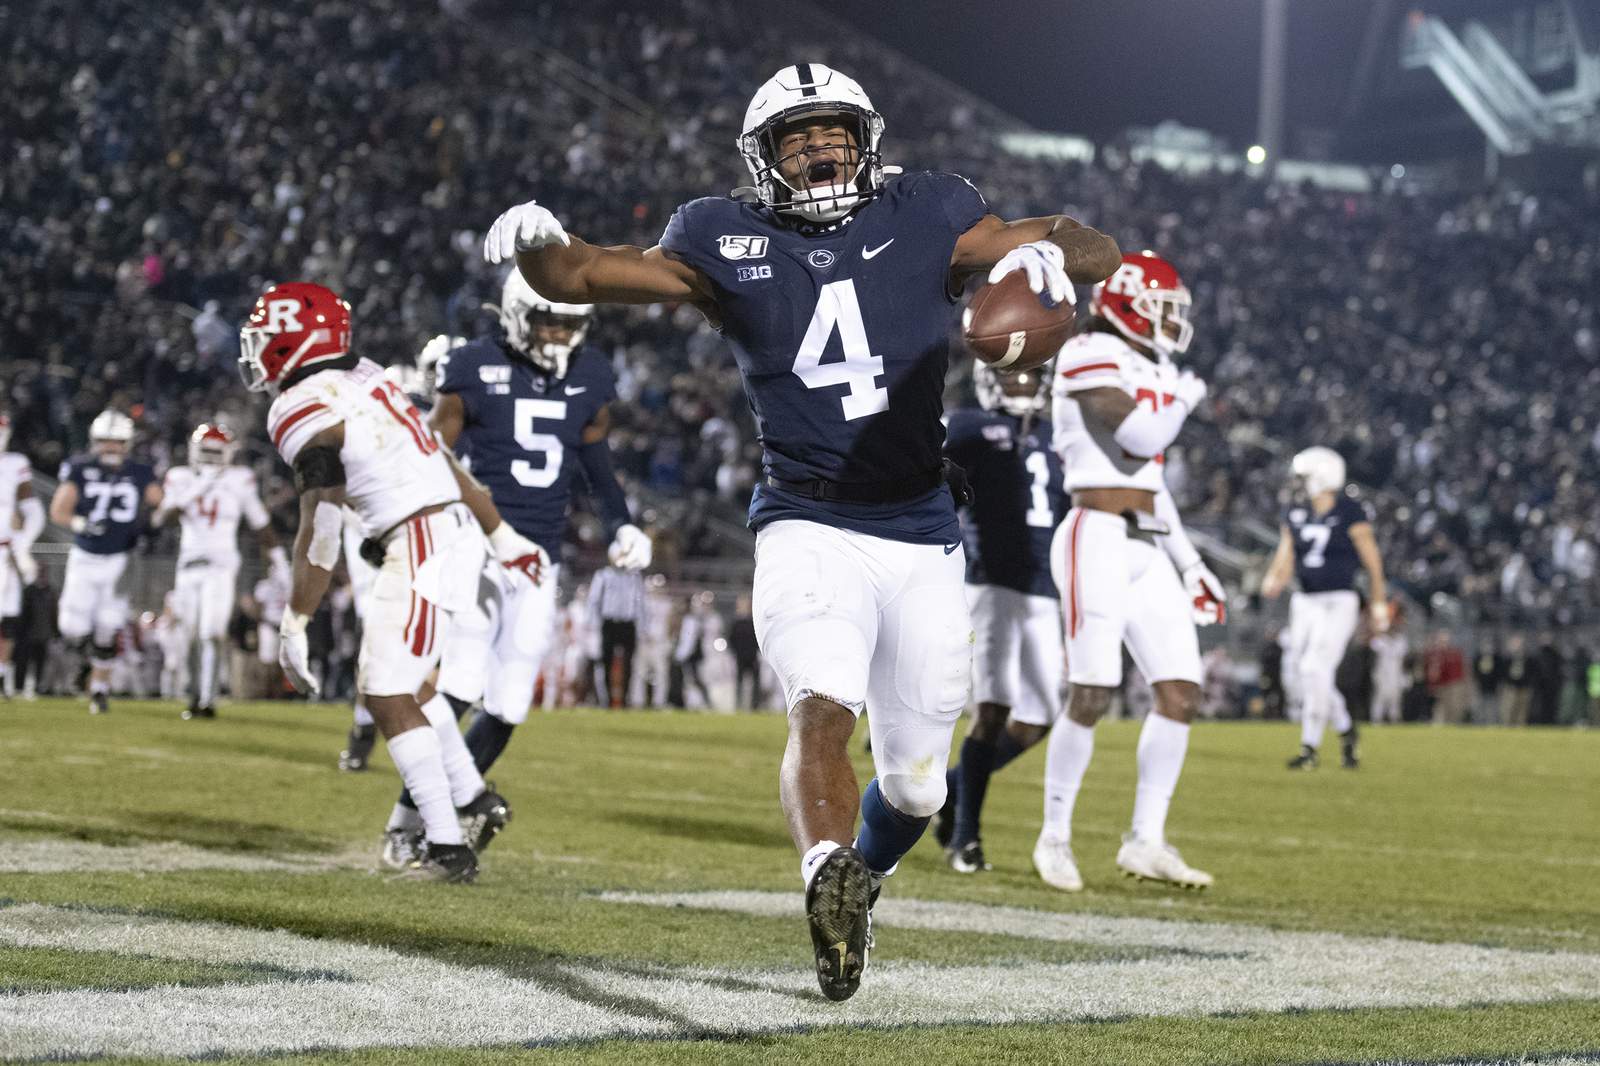 Heart condition forces Penn St. RB Brown to give up football